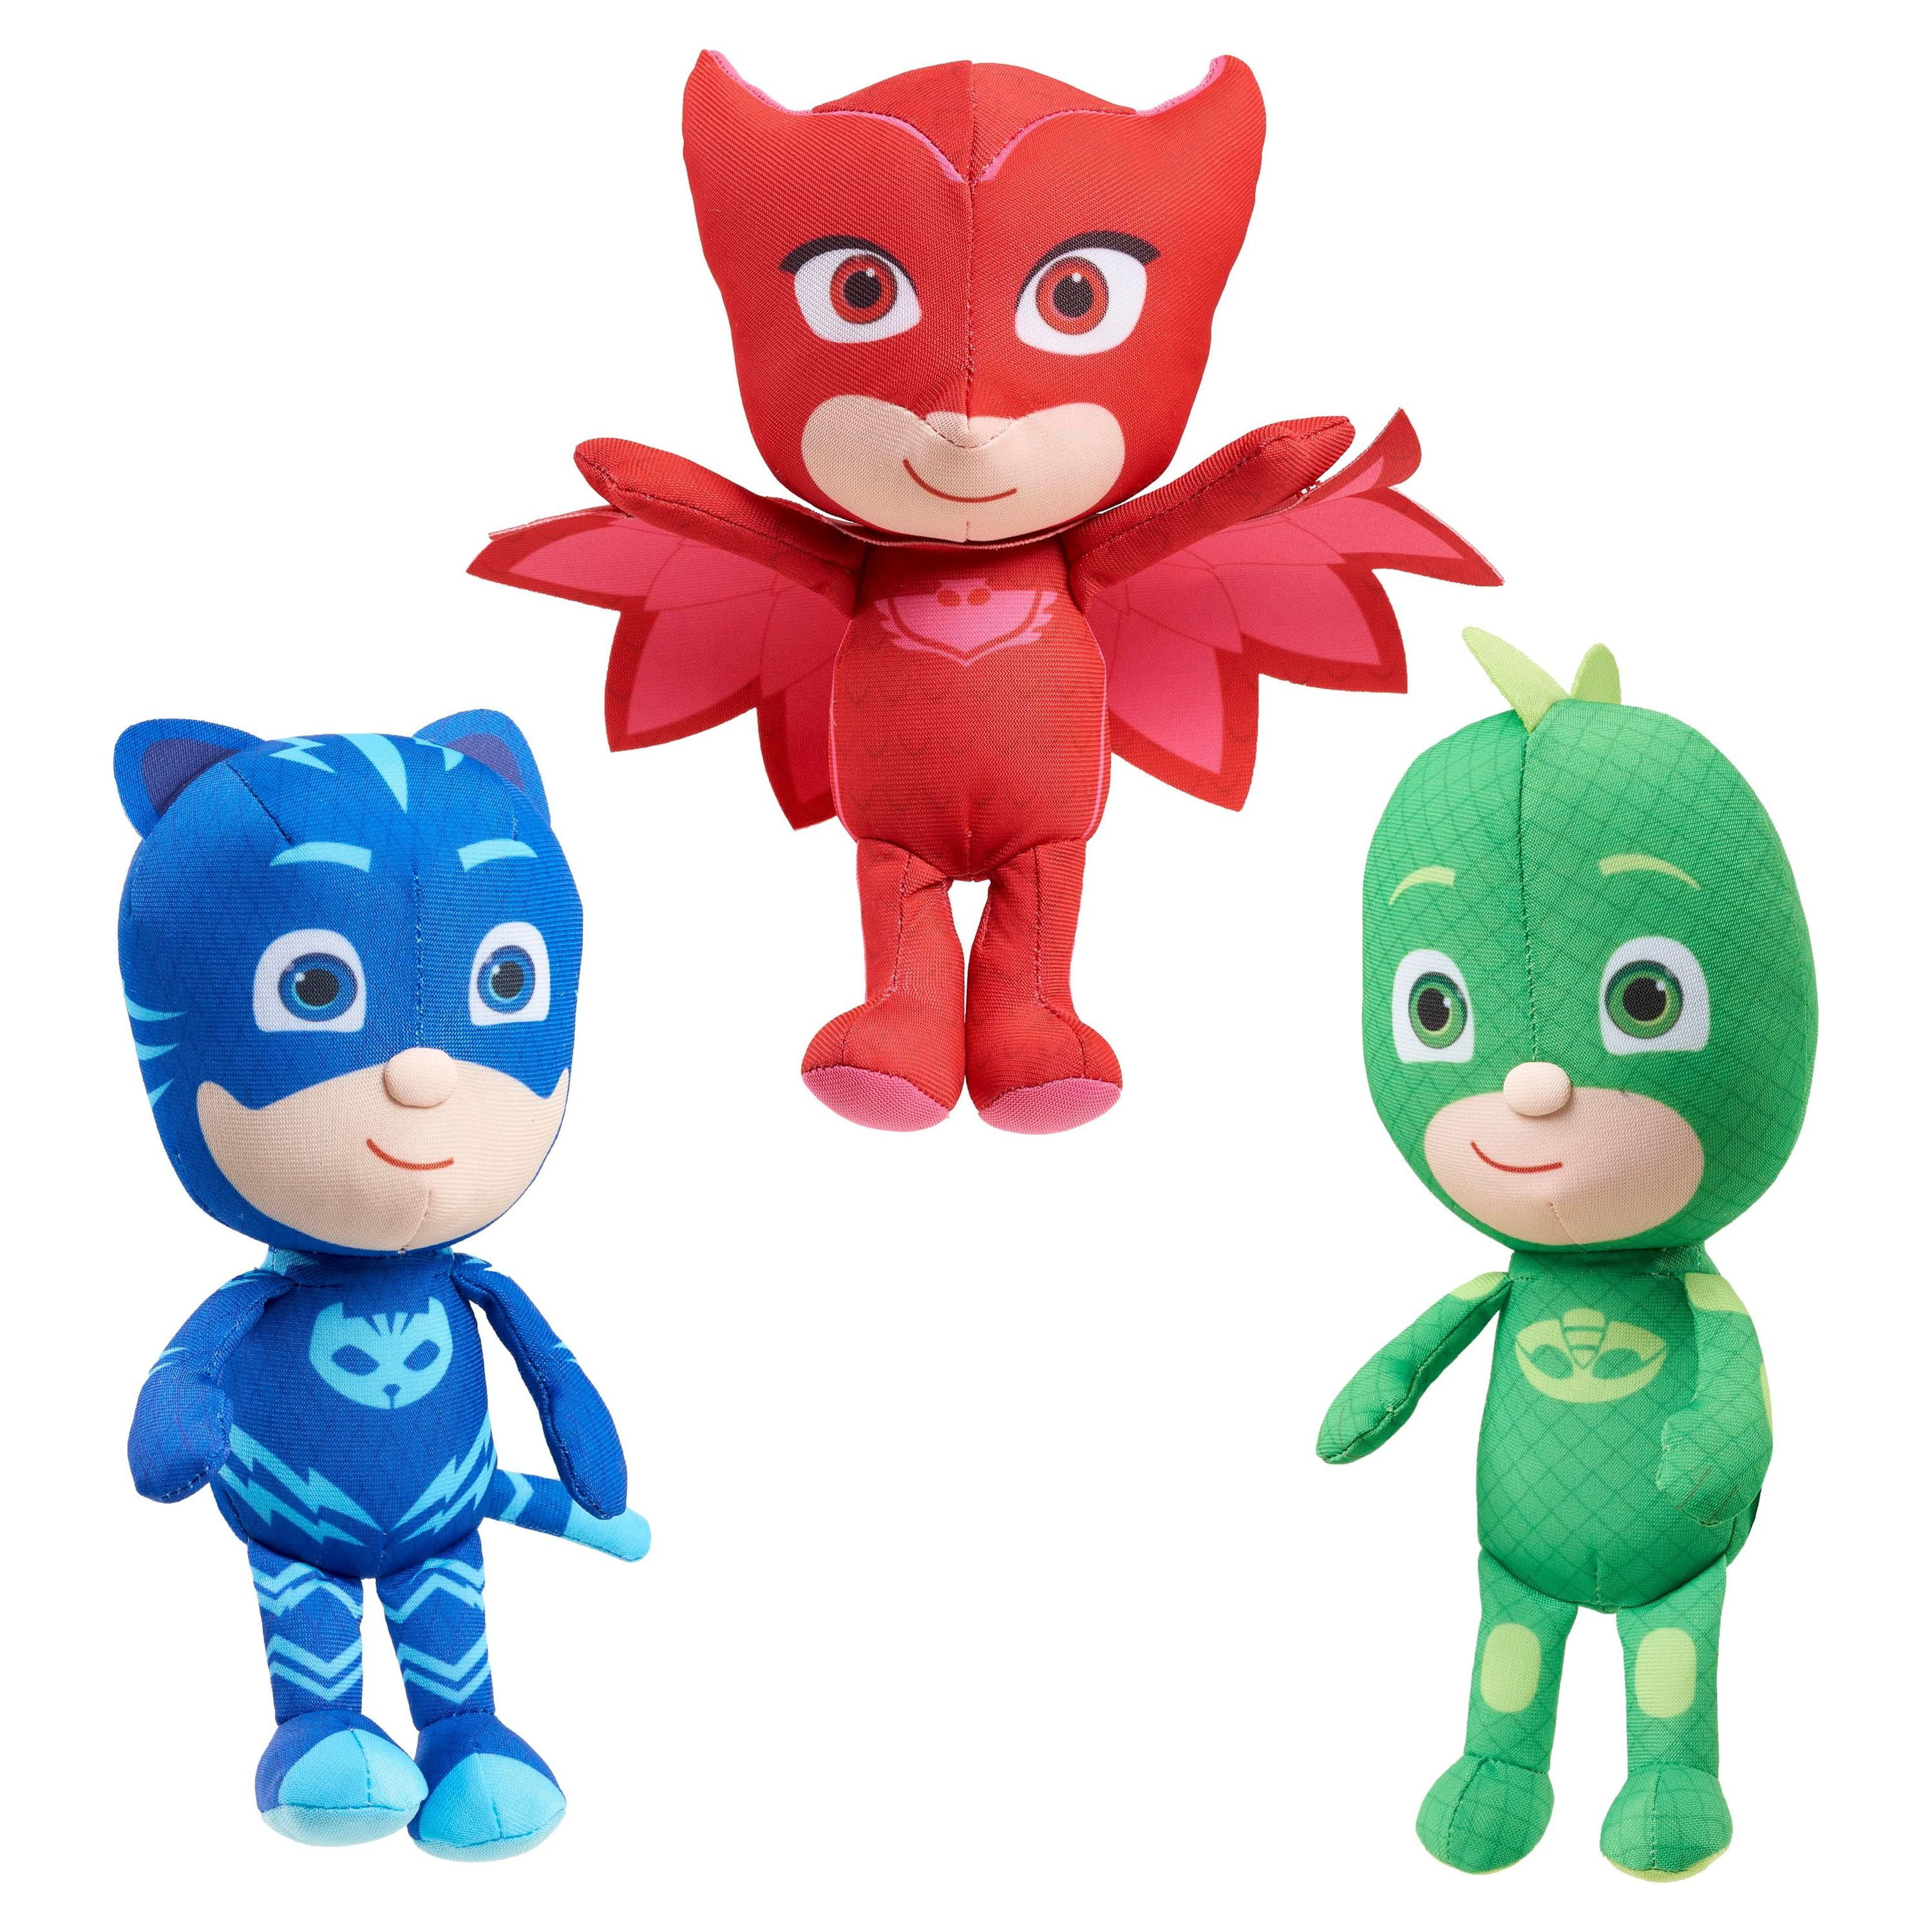 PJ Masks Mini Plush Asst, 3 Pack Bundle- includes Catboy, Owlette & Gekko,  Kids Toys for Ages 2 Up, Gifts and Presents